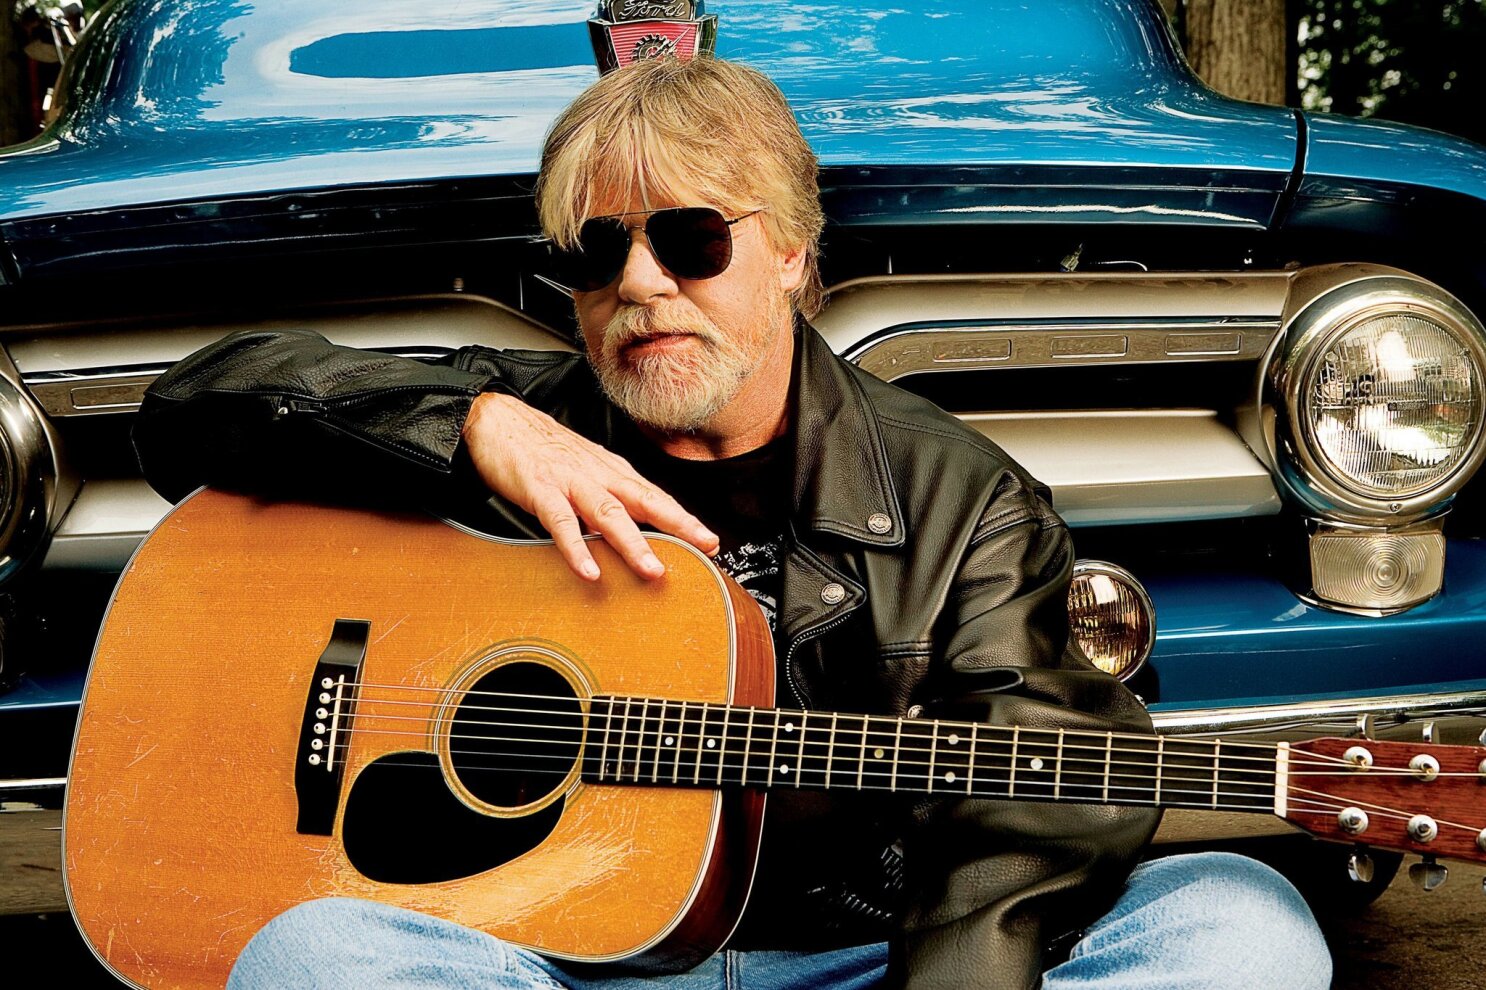 An in-depth interview with Bob Seger. - The San Diego Union-Tribune